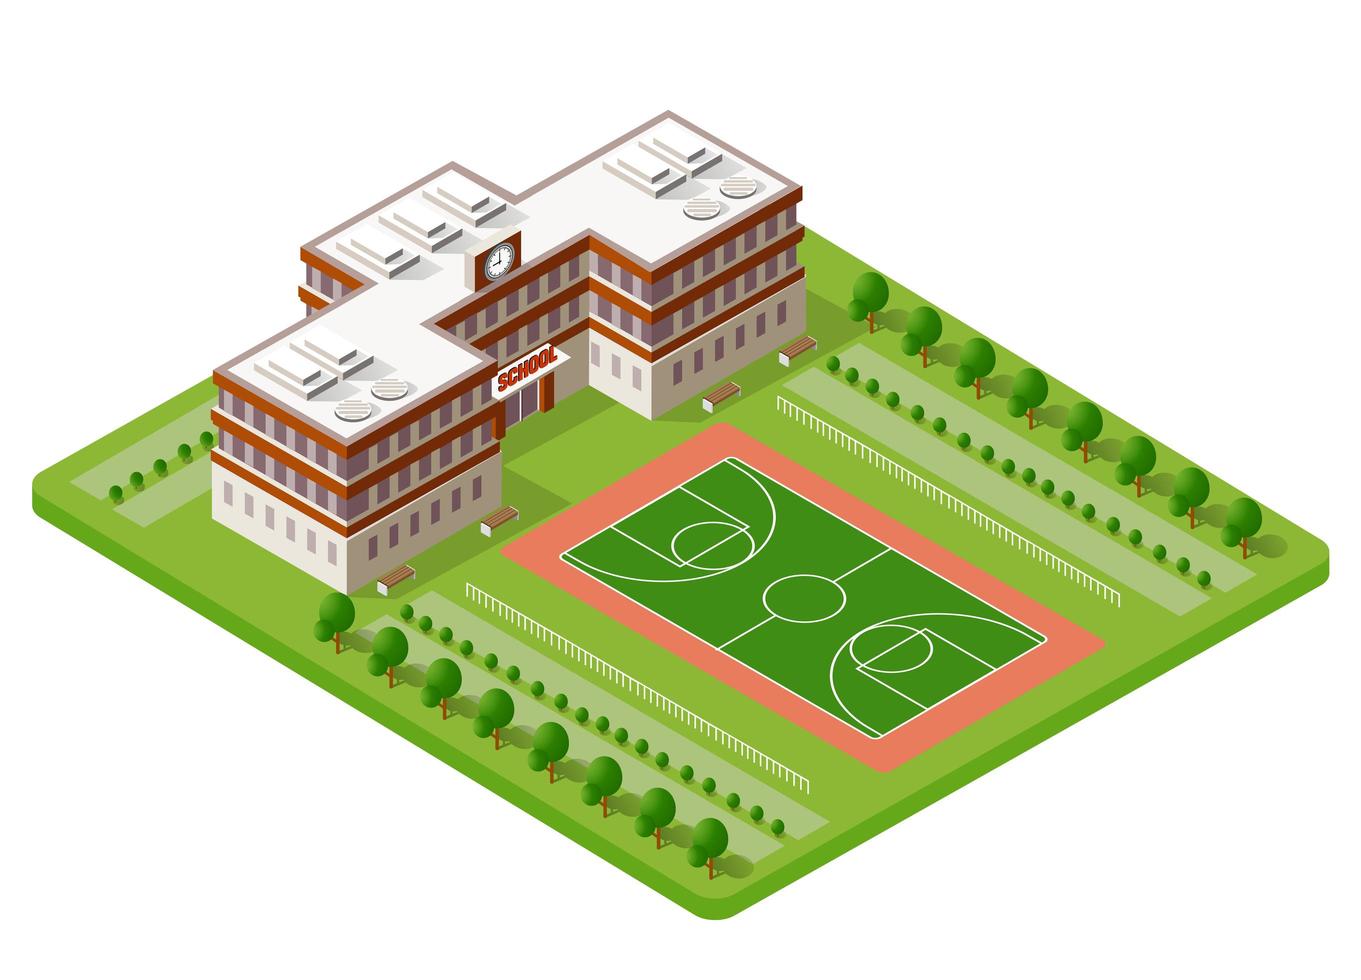 School isometric building study education urban infrastructure for conceptual design vector illustration with houses and streets.